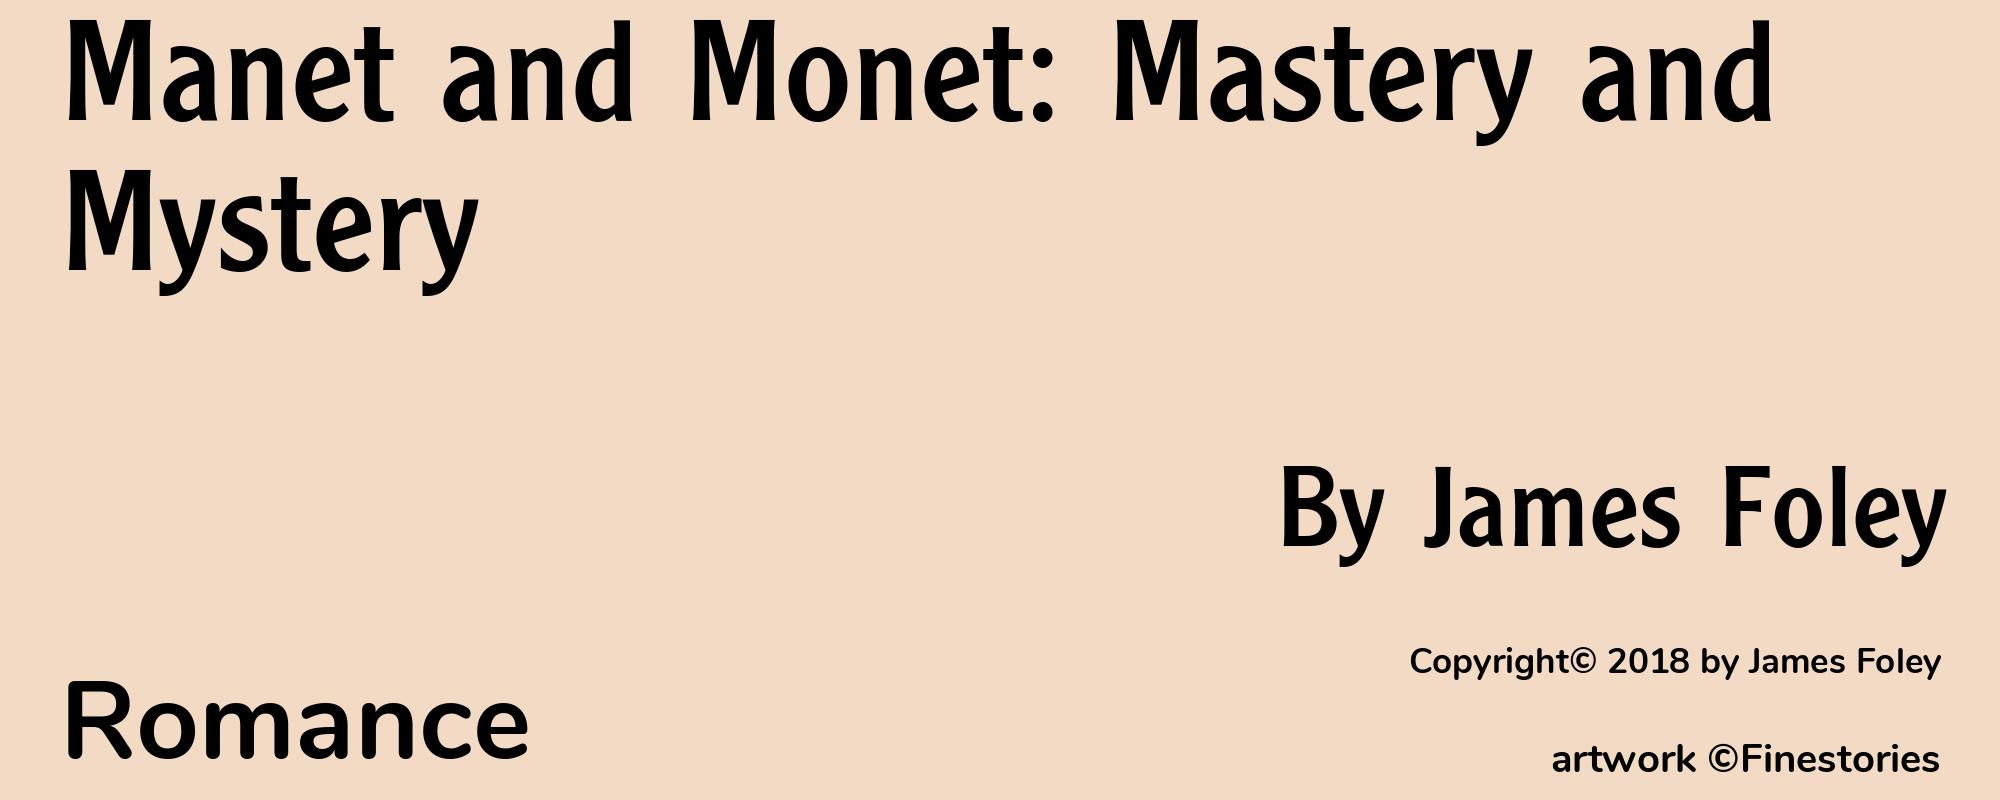 Manet and Monet: Mastery and Mystery - Cover